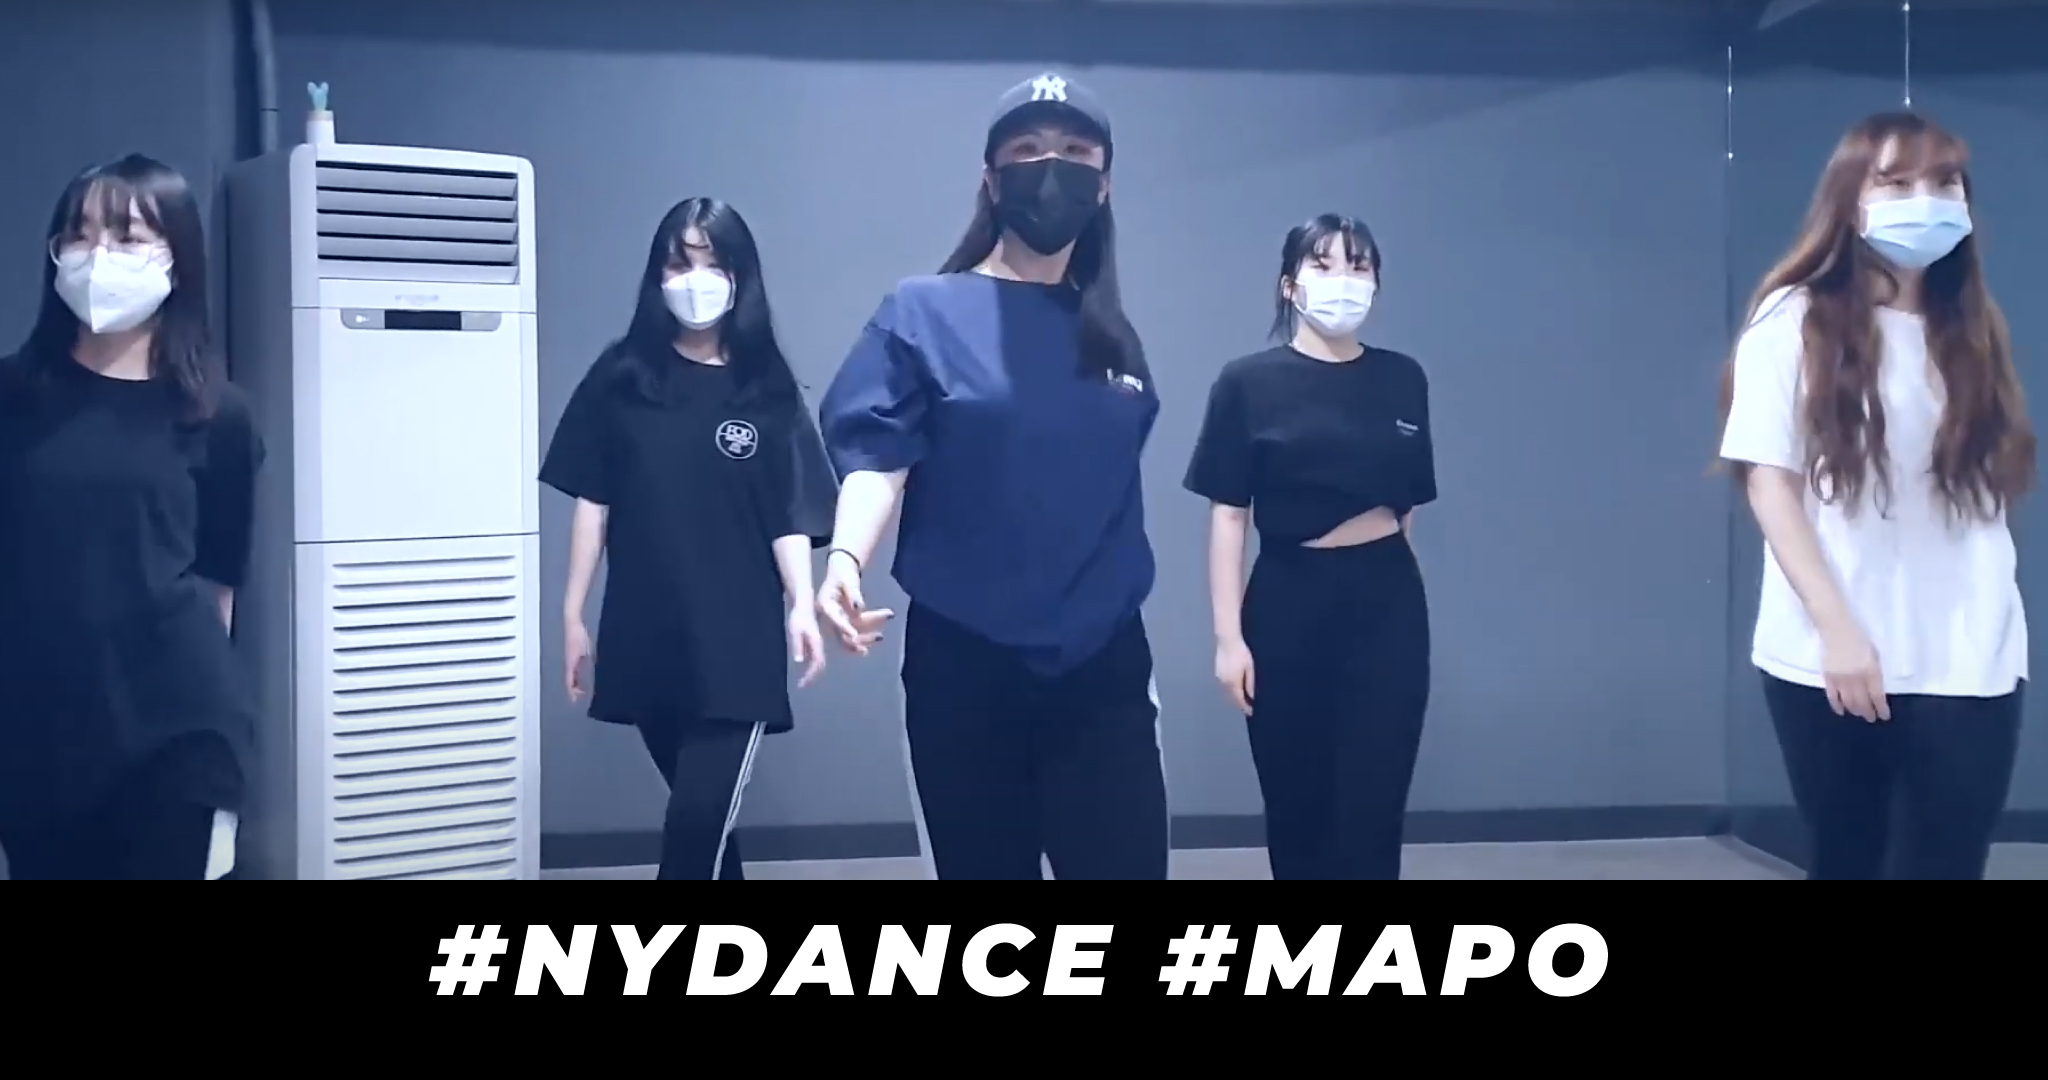 NYDANCE MAPO – GIRL’S HIPHOP CLASS